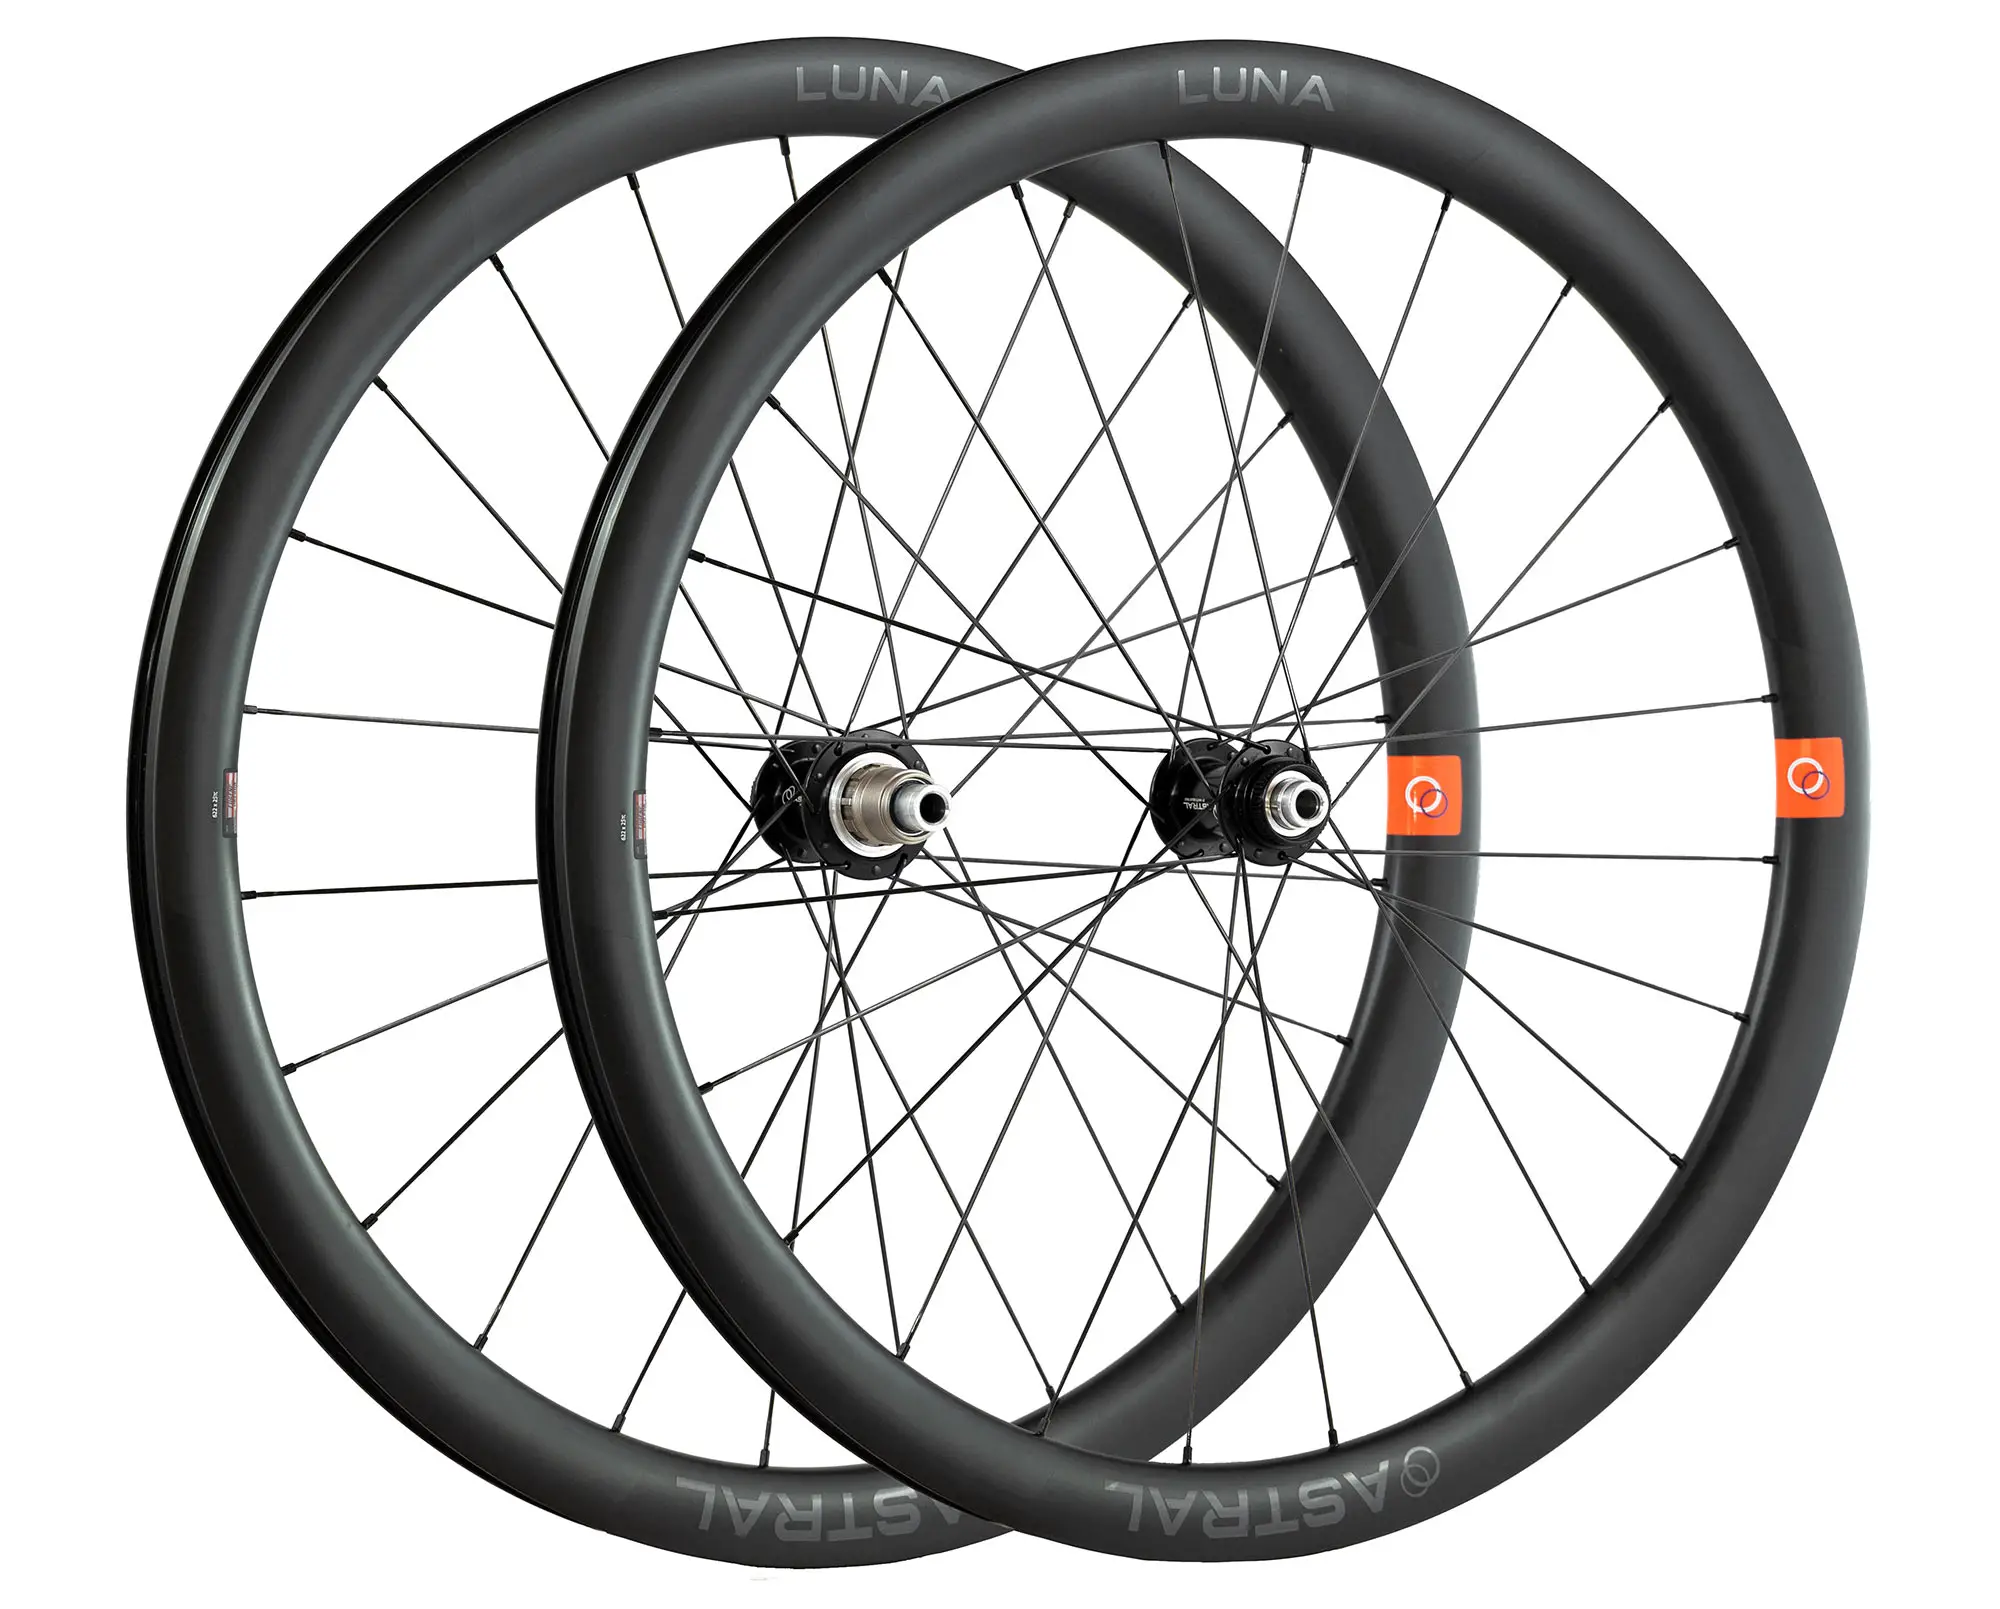 Astral Luna Carbon all-road wheels come ready for anything